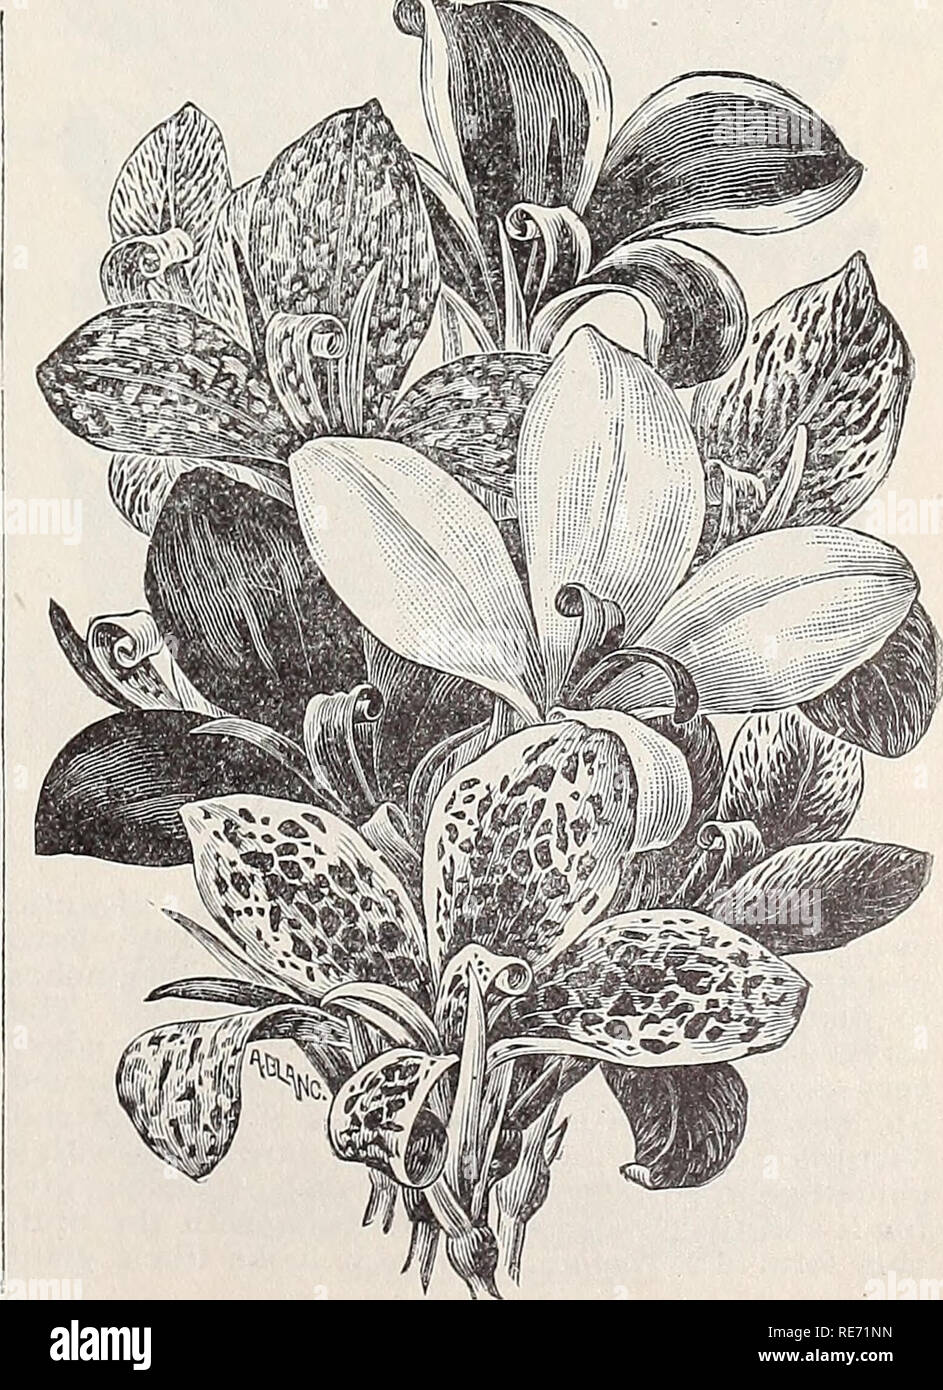 . Cox seed and plant co. catalogue. Seed industry and trade Catalogs; Seeds Catalogs; Flowers Seeds Catalogs; Fruit Seeds Catalogs; Plants, Ornamental Catalogs; Trees Catalogs. BEGONIA. BEGONIAS (Tube, -ous-Rooted) — We have im- ported direct from Mr. John Laing, of England „ new Single and Double Begonia Roots. The flowers are borne on upright stiff stems and often exceed 5 inches in diameter when well grown. Nothing can exceed the brilliancy of their waxy flowers. Will do well in the open air during the spring and sum- mer months. They make a fine plant for window or conservatory decorations Stock Photo